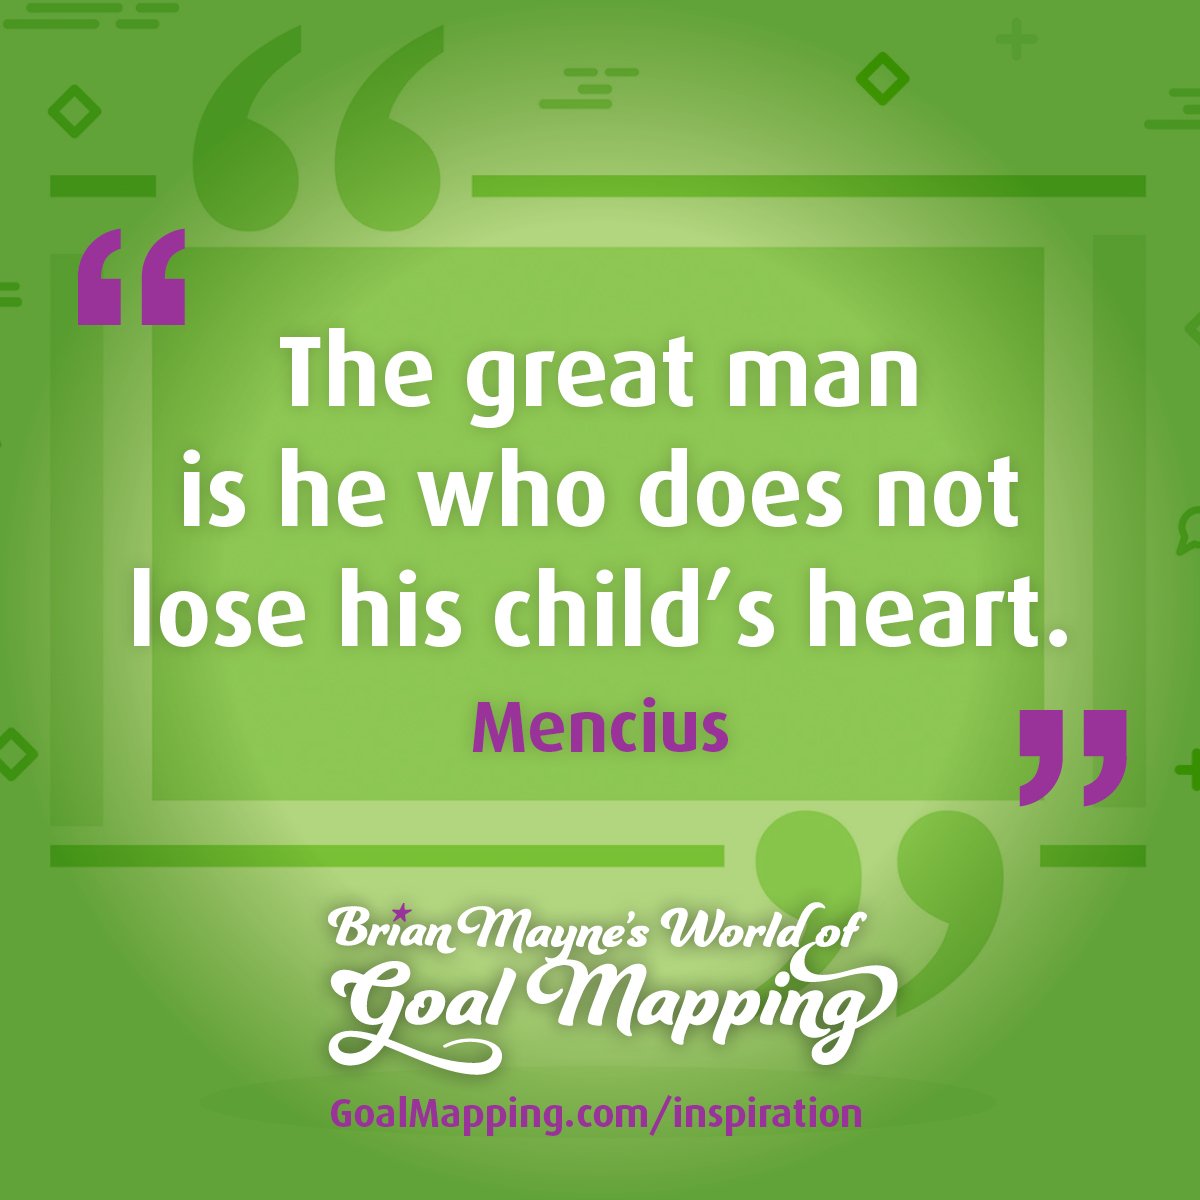 "The great man is he who does not lose his child’s heart." Mencius